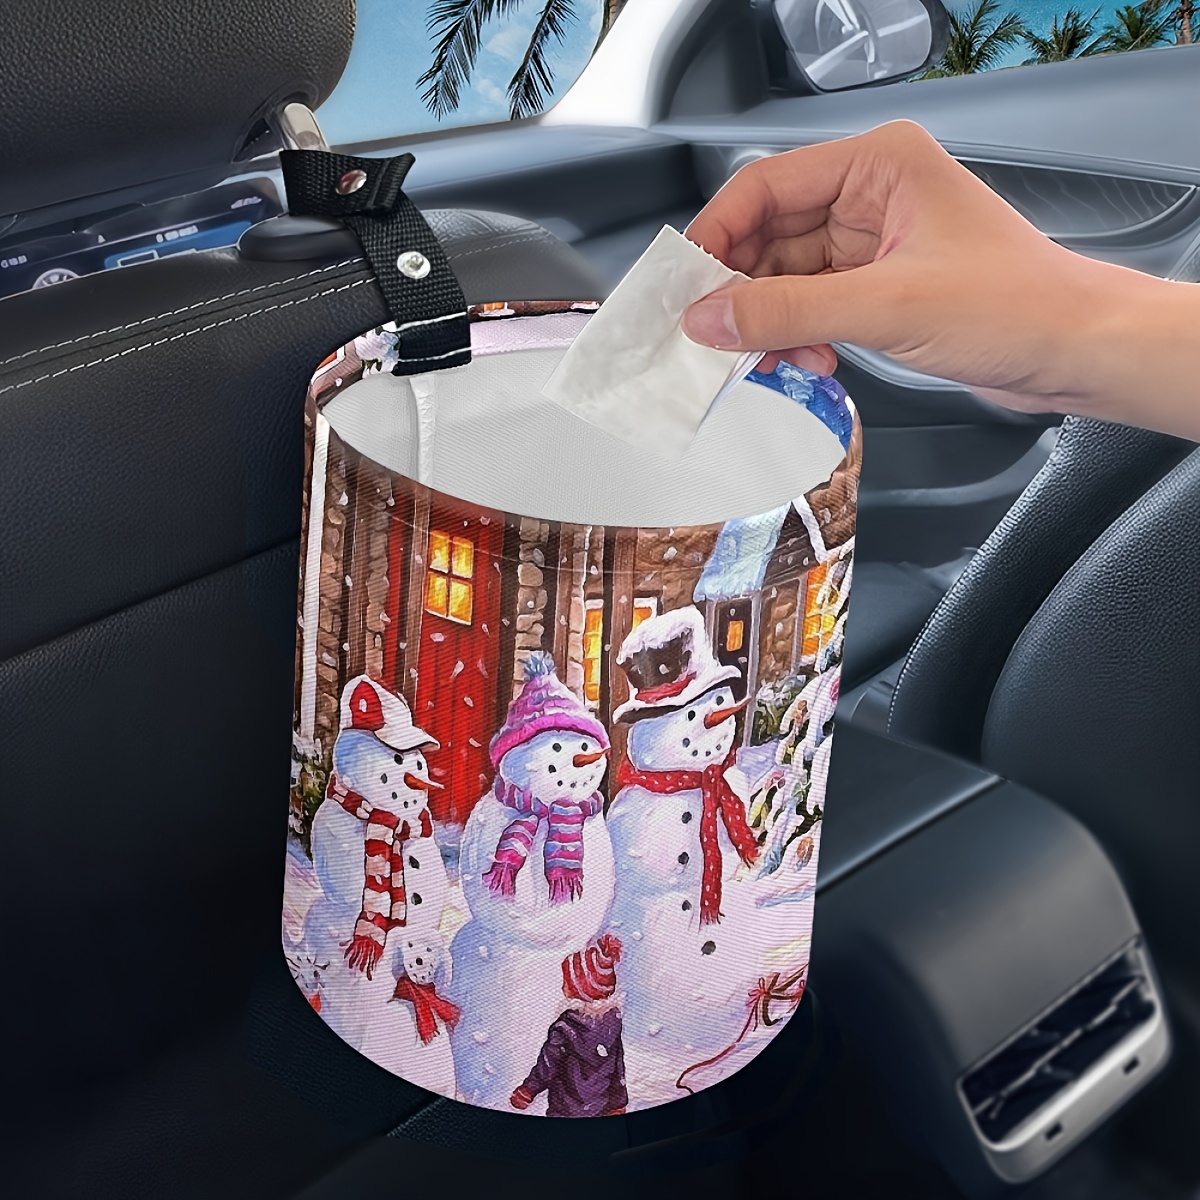 Hechitok Pine Tree Snowman Car Garbage Bag, Christmas Hanging Vehicle  Garbage Can Multipurpose Storage Container for Outdoor Traveling Home Use  Car